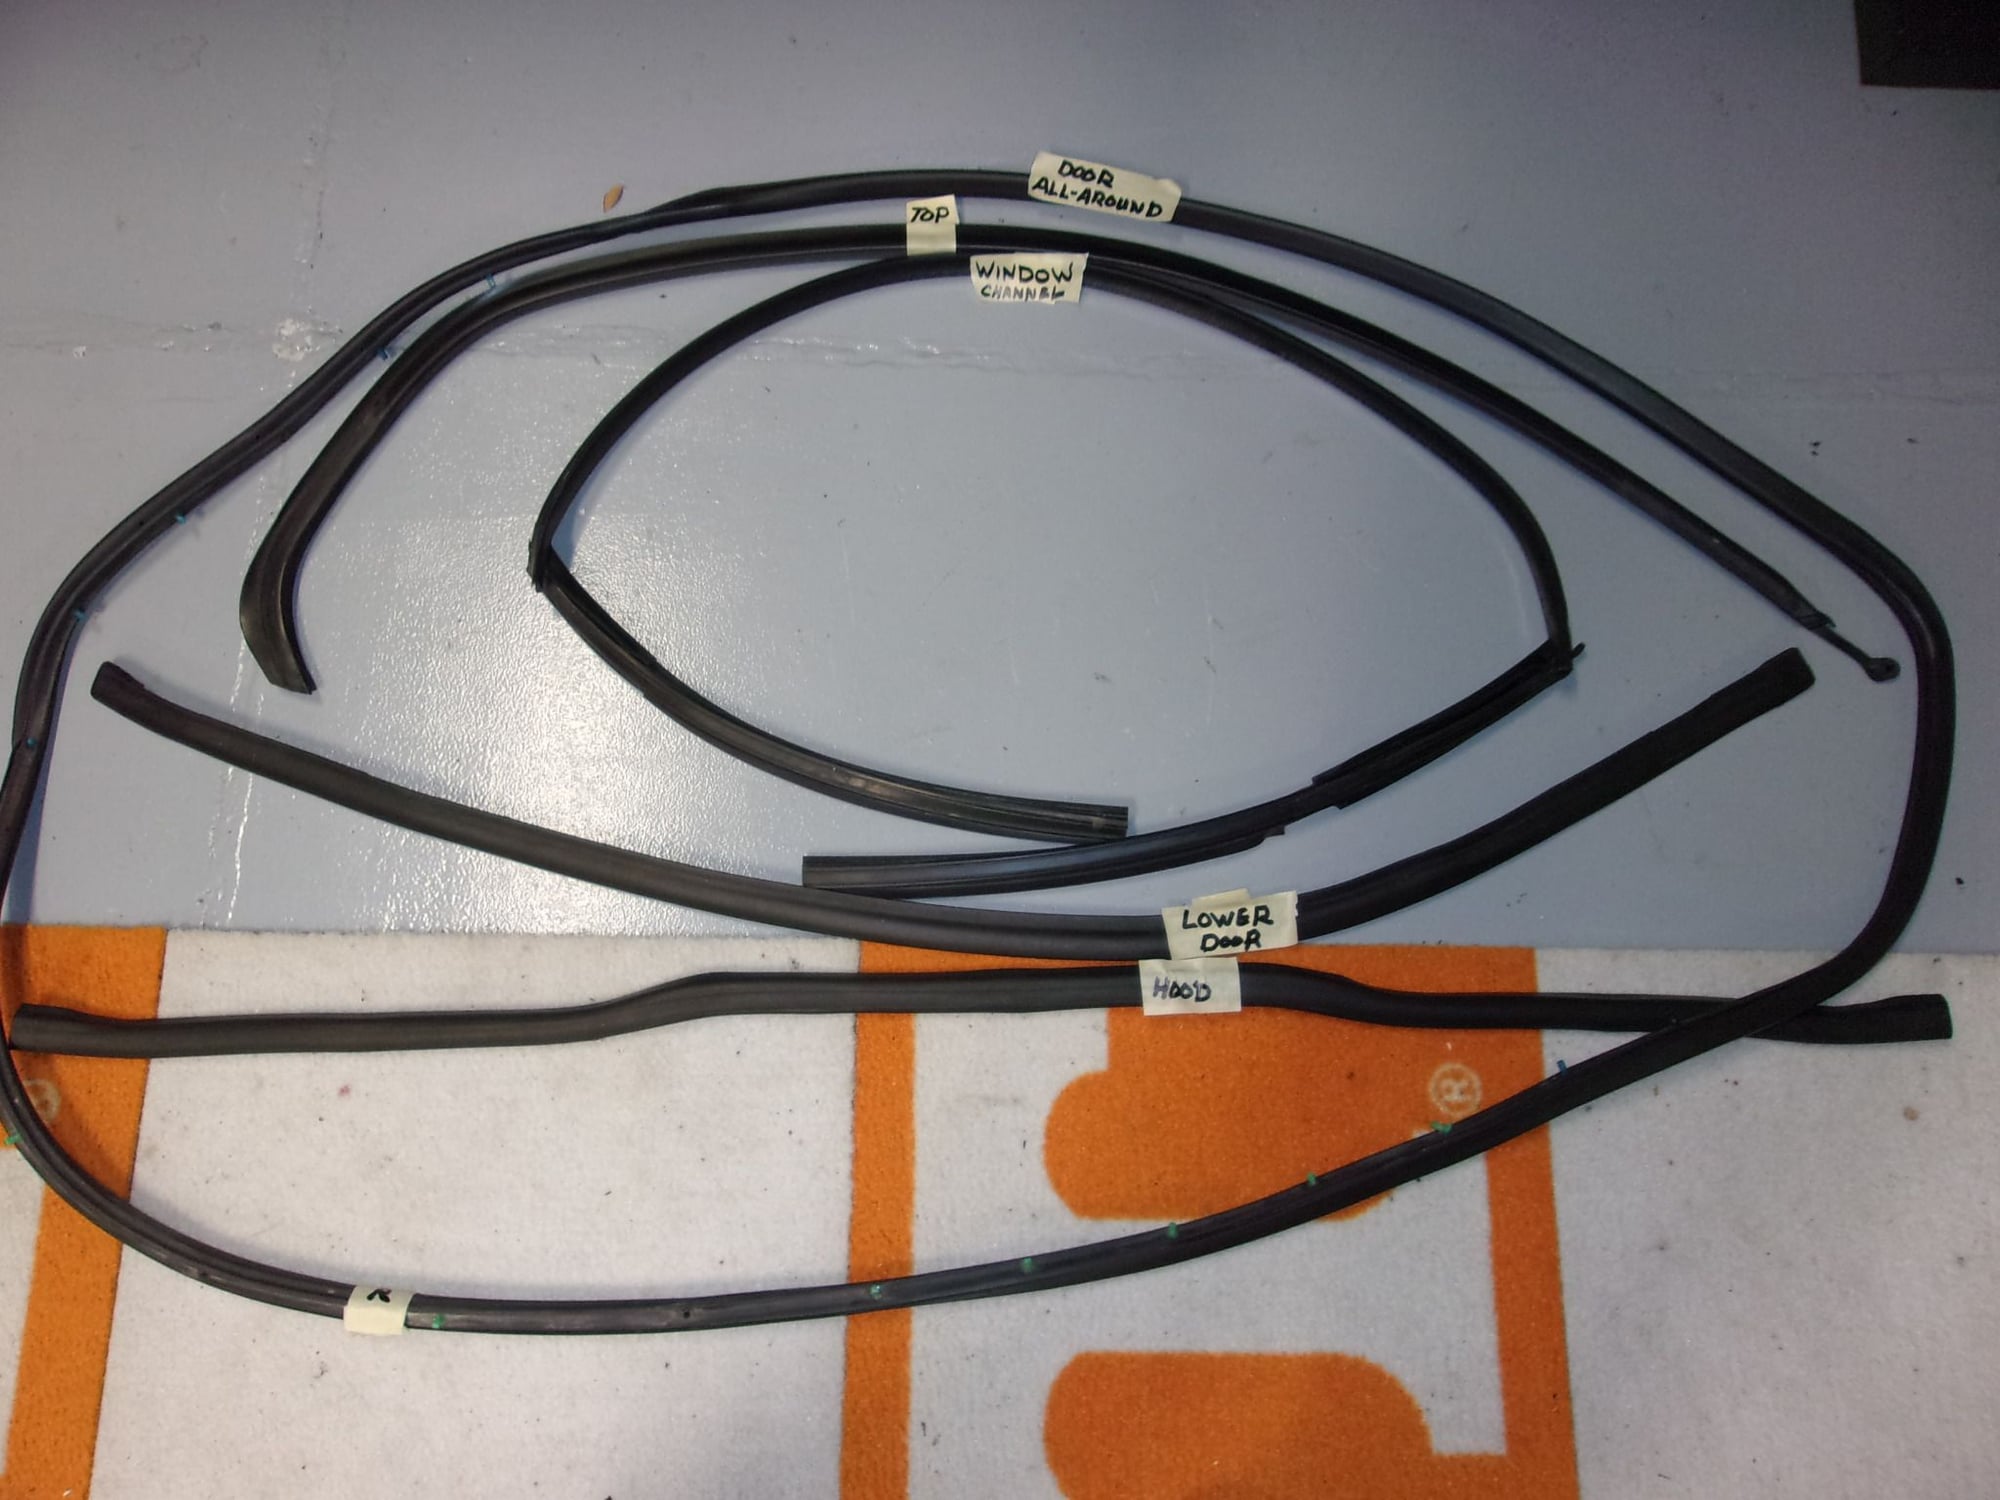 Steering/Suspension - FD Weather Strips/Seals - Used - 1993 to 2002 Mazda RX-7 - Murfreesboro, TN 37130, United States